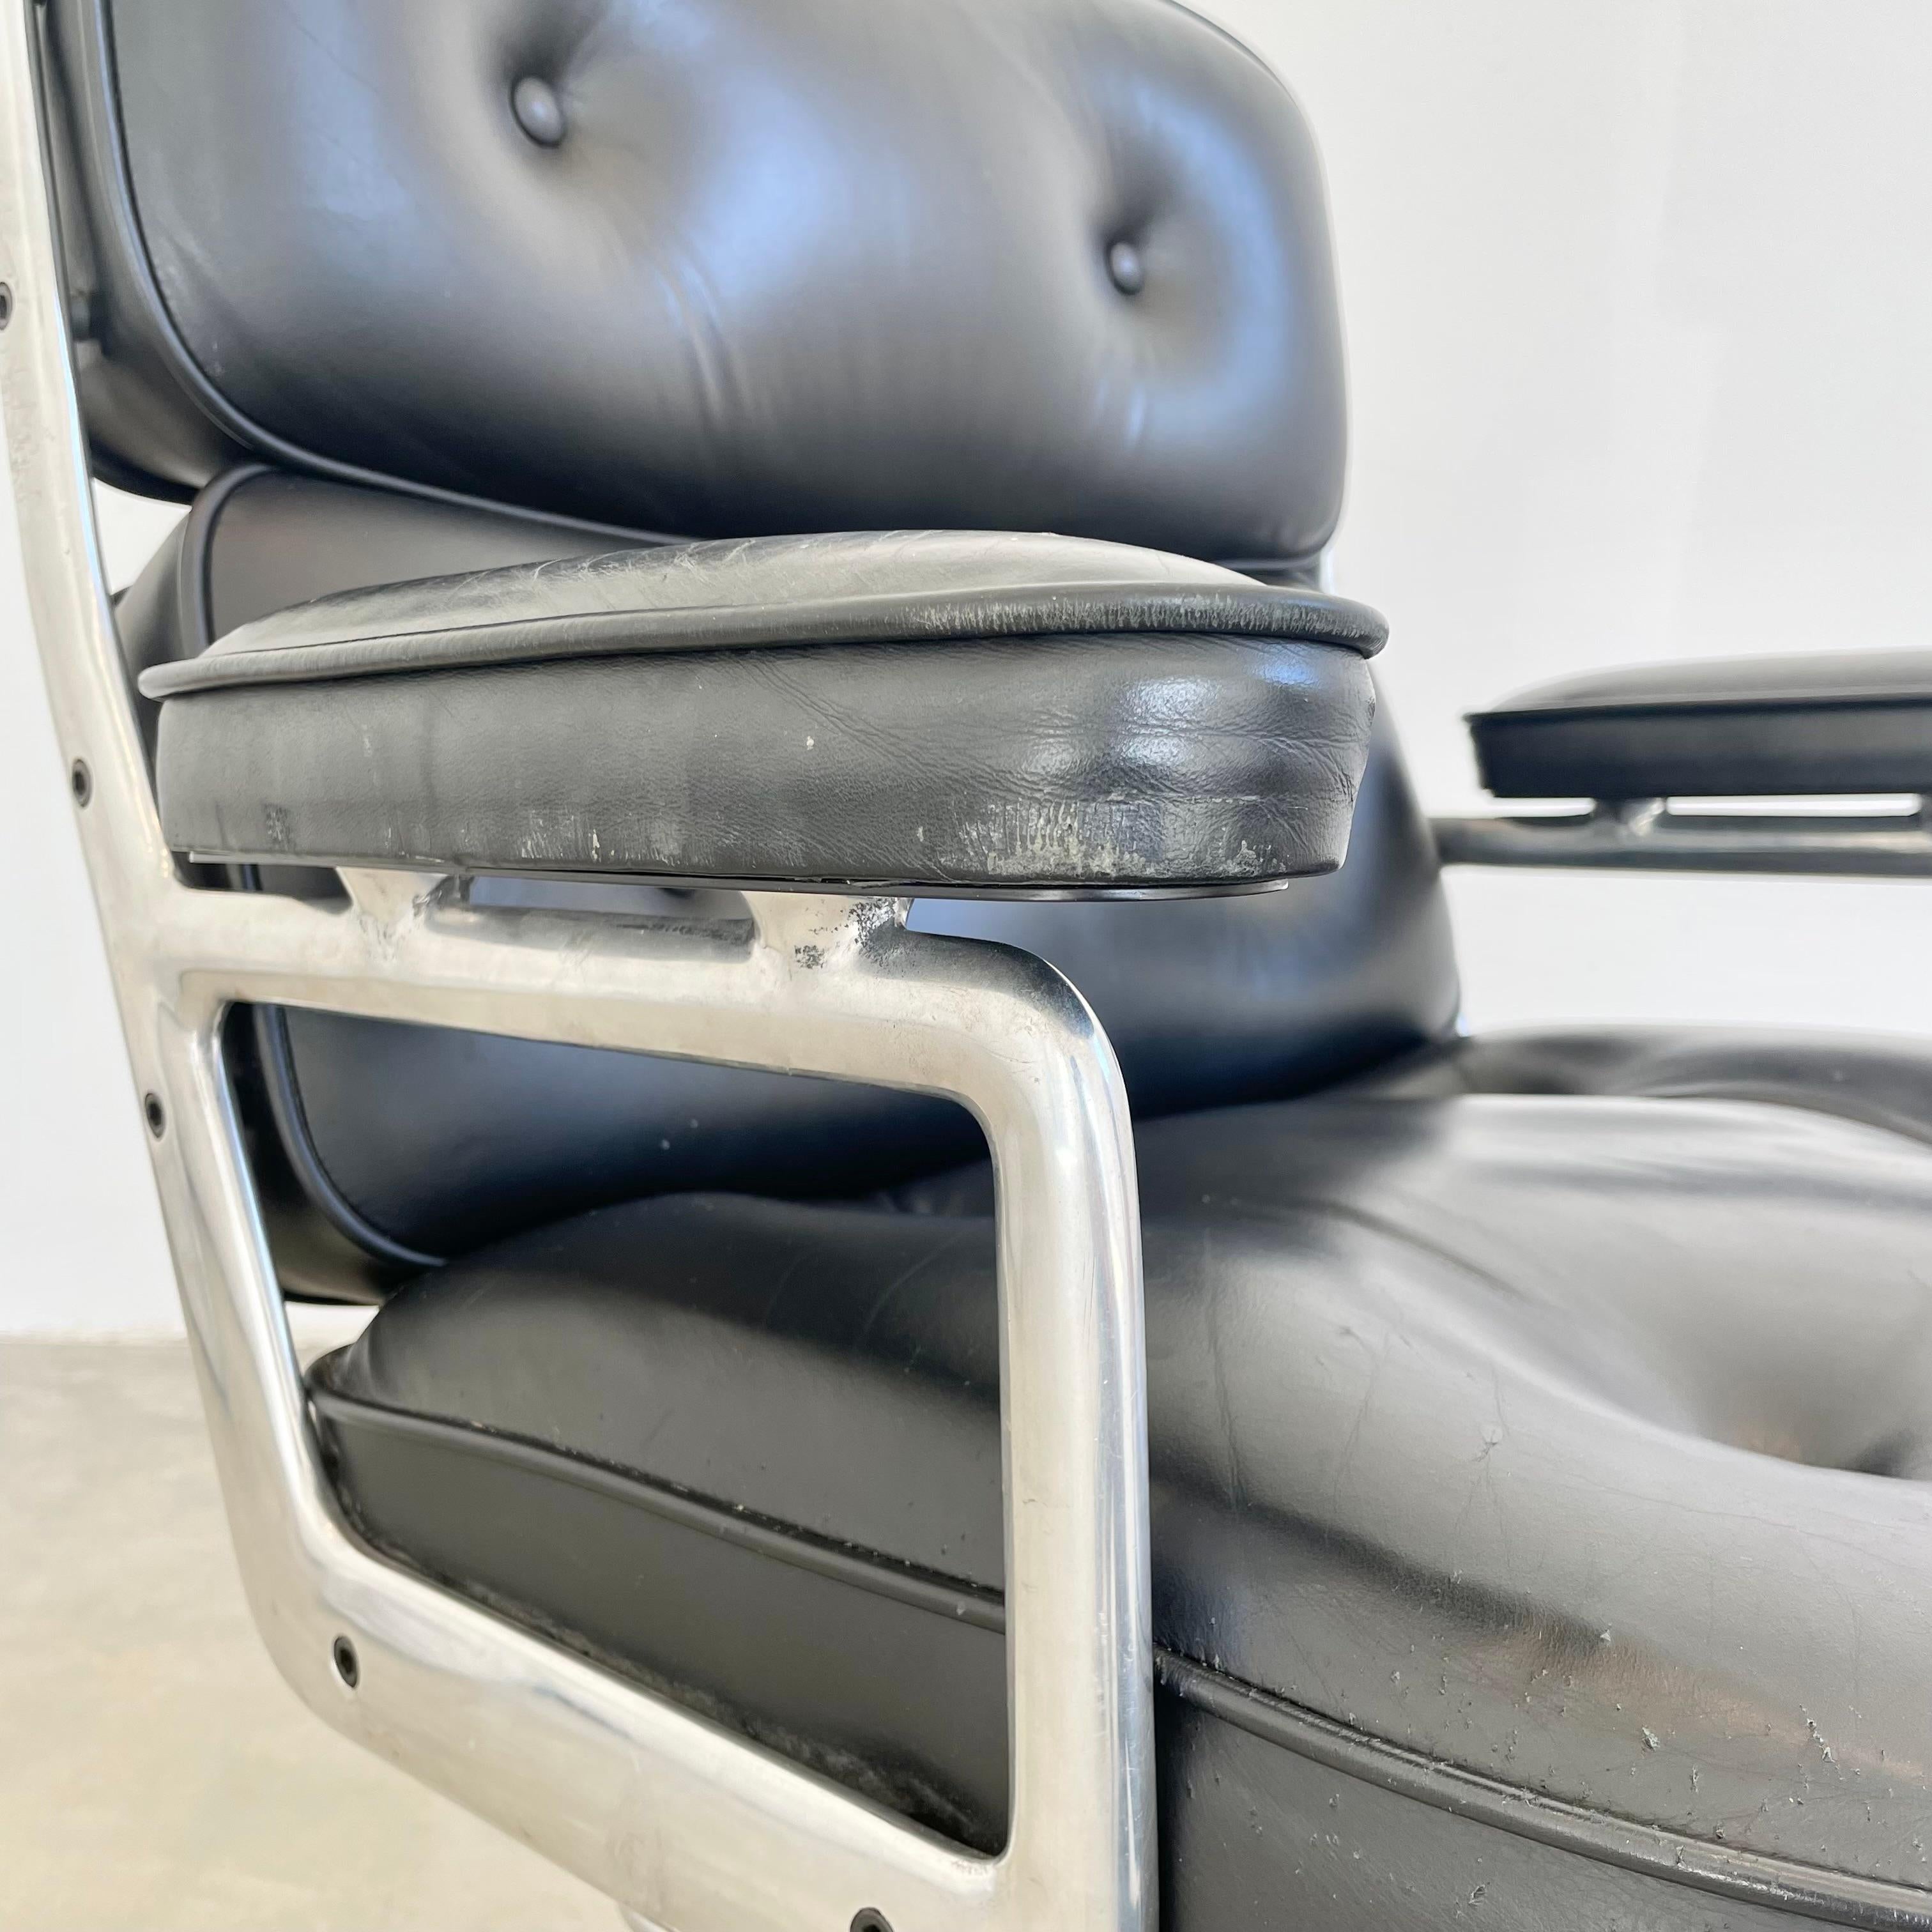 North American Eames Time Life Chair in Black Leather for Herman Miller, 2006 USA